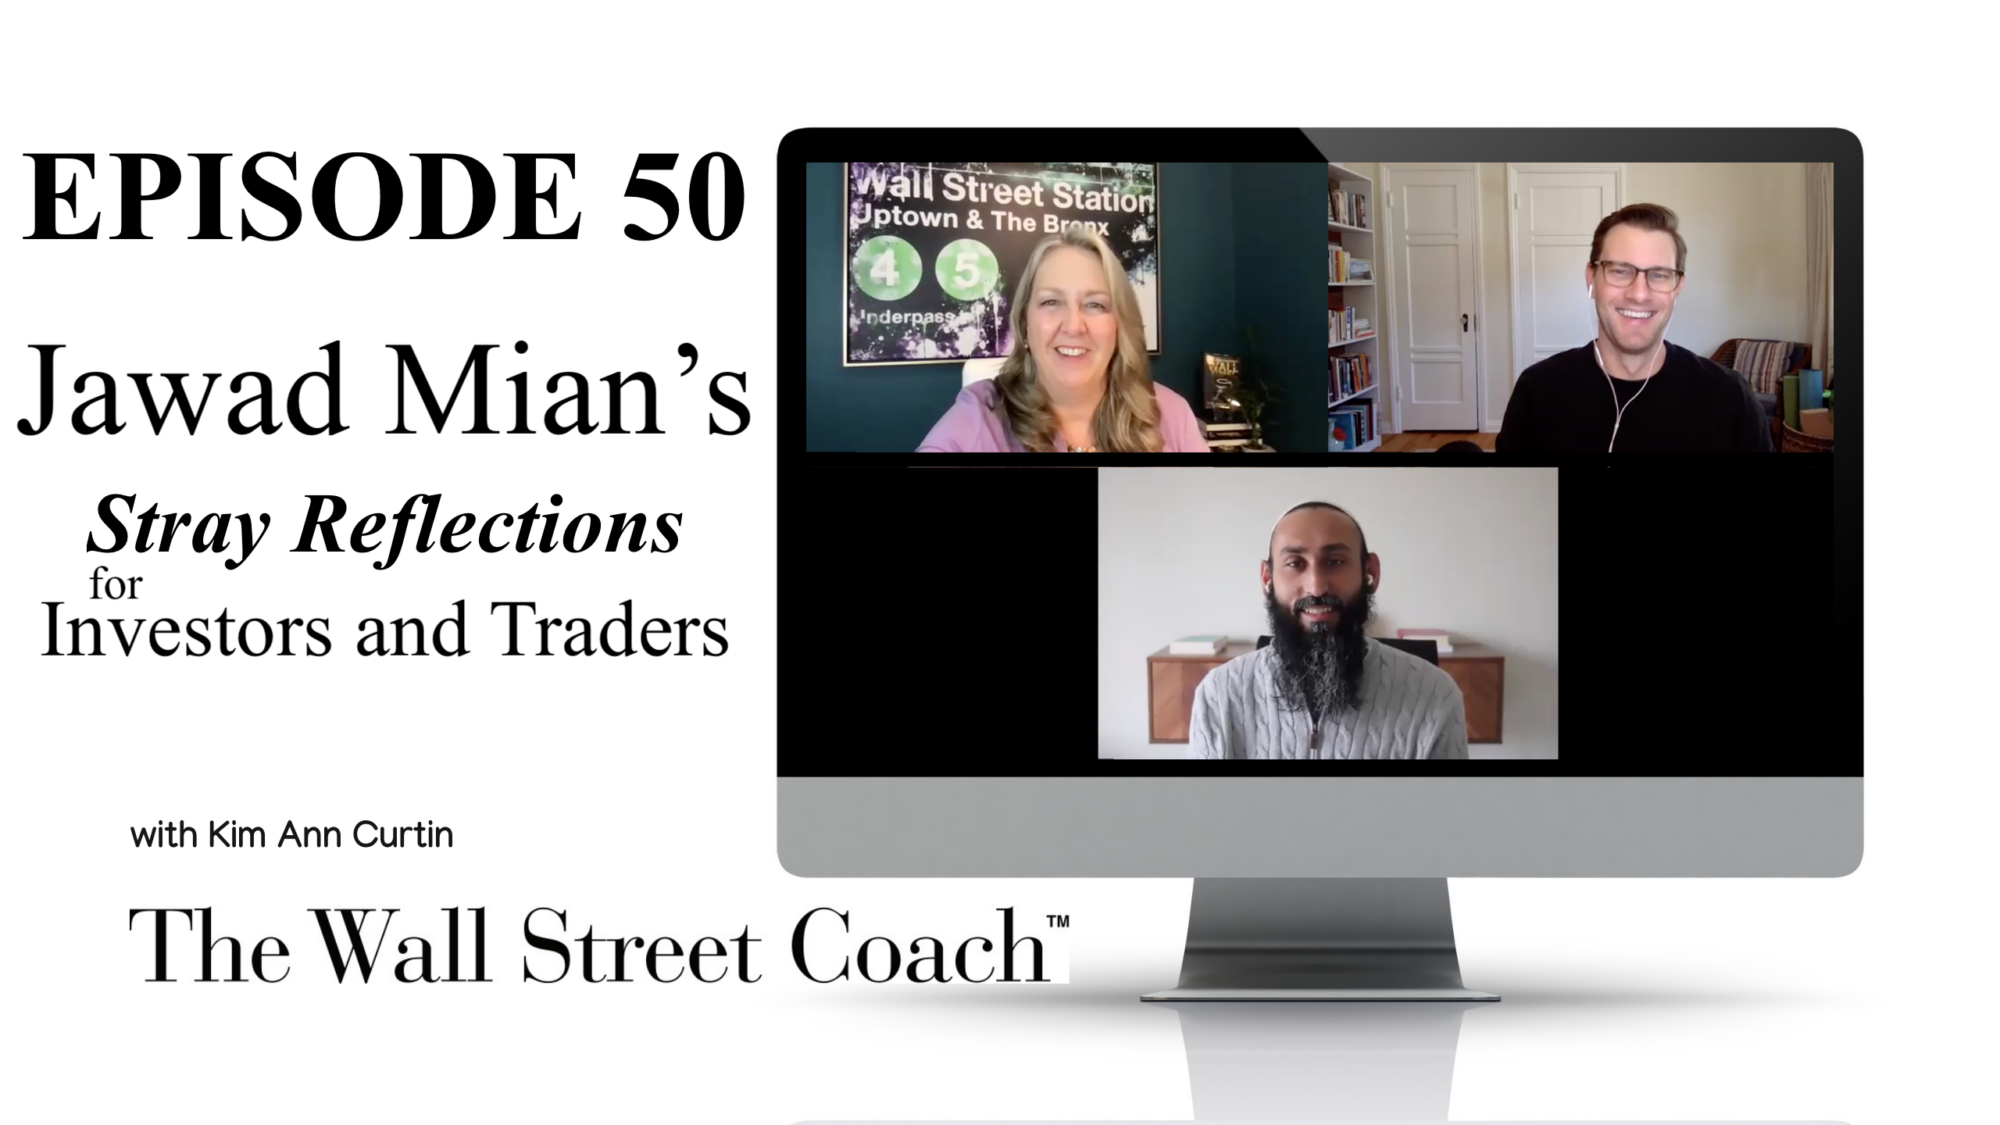 Episode 50: Jawad Mian’s Stray Reflections for Investors and Traders